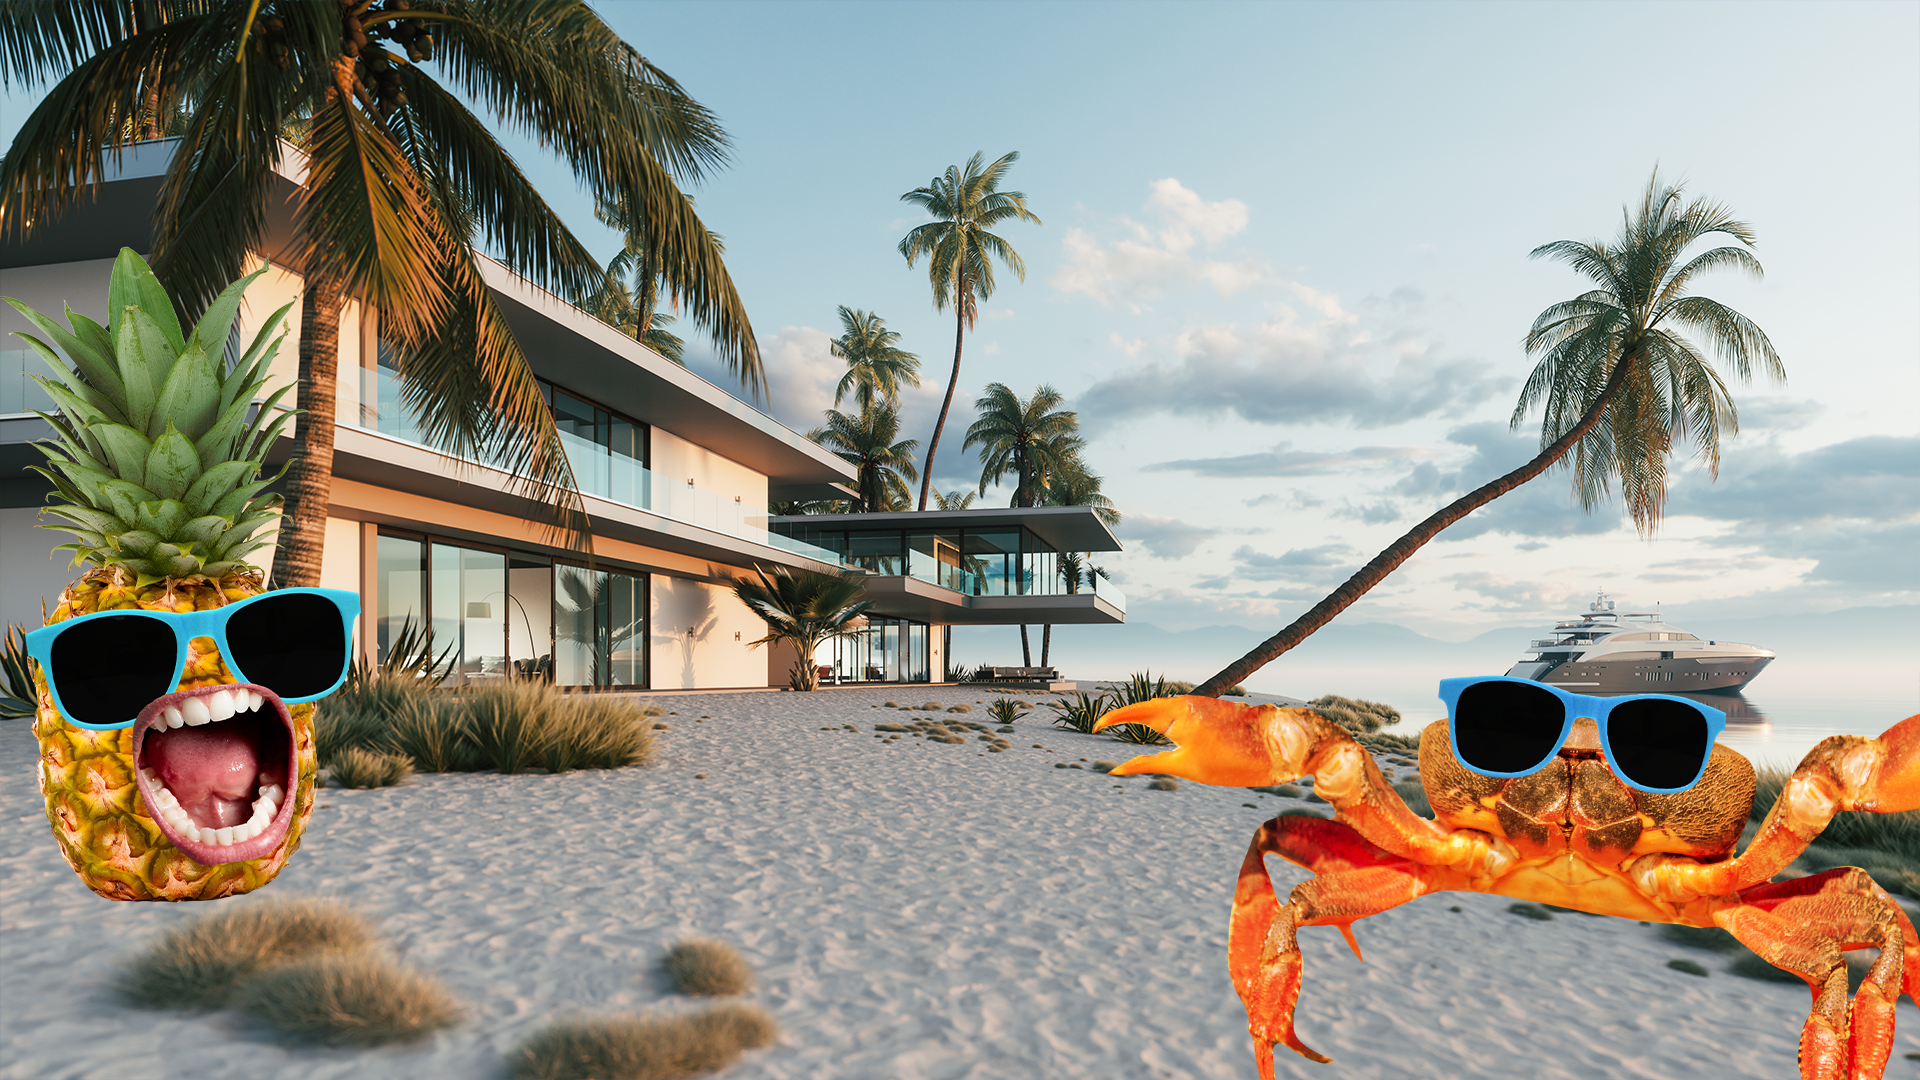 A beach house with a cool crab and pineapple